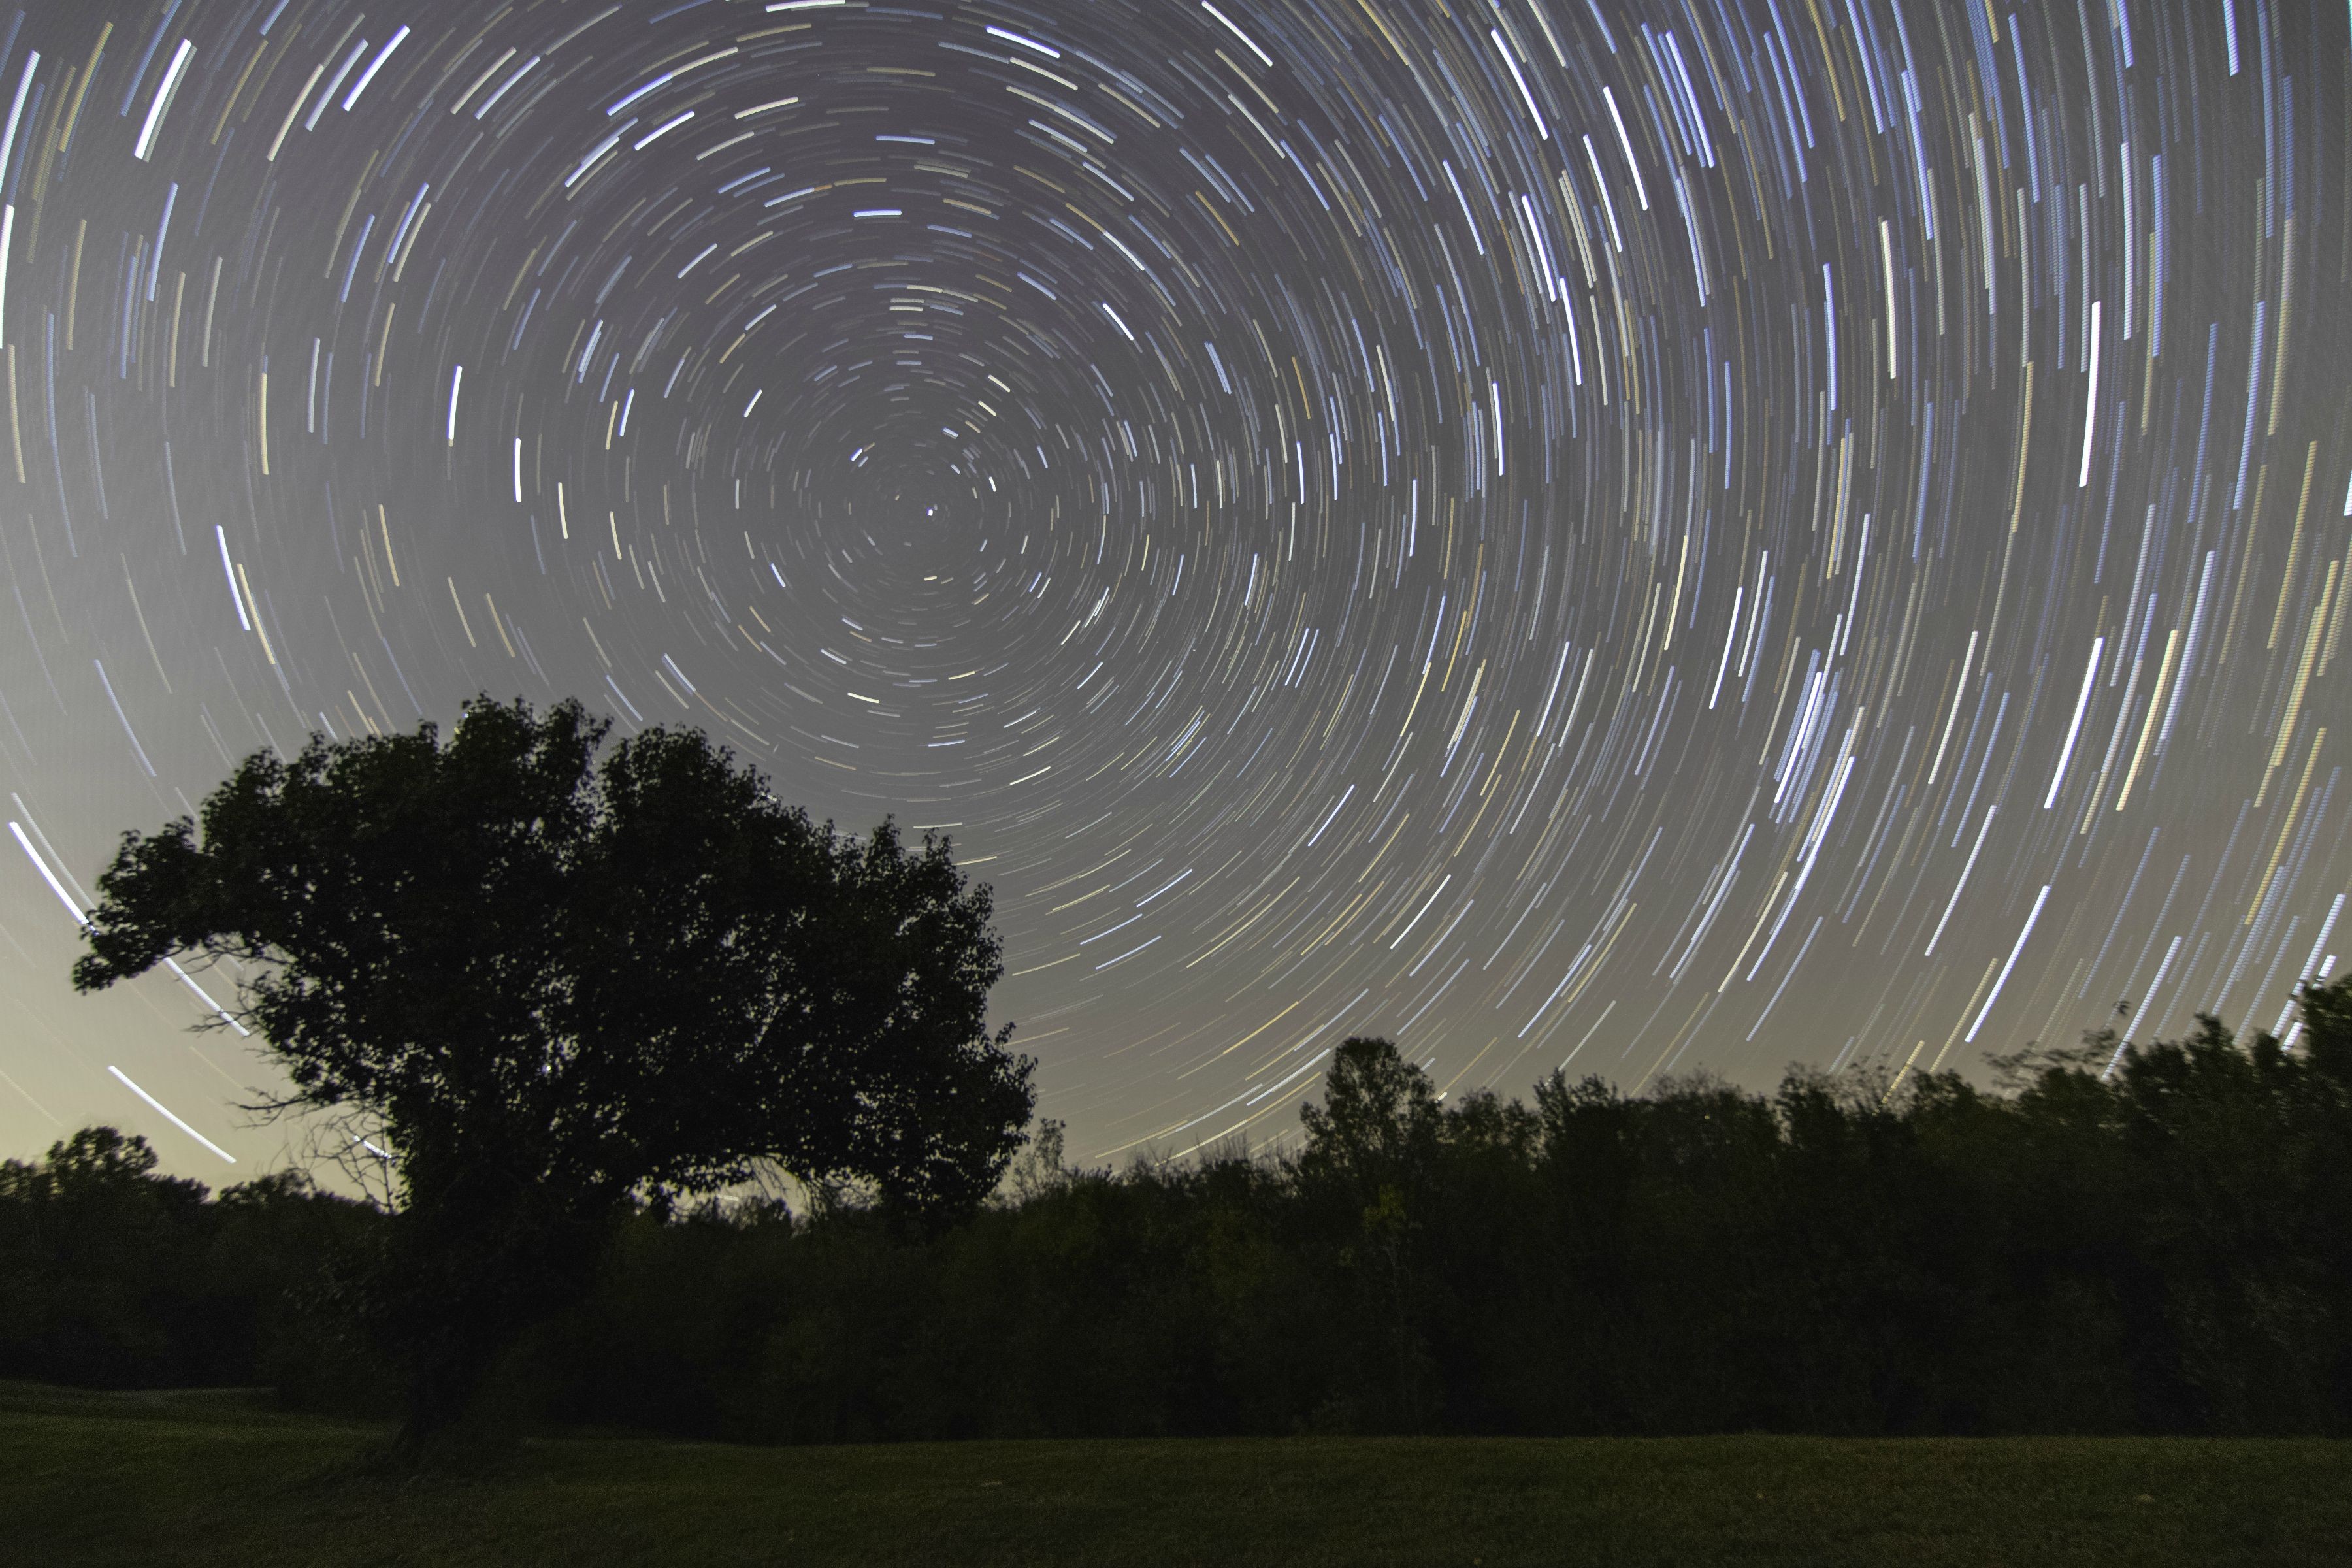 General 3600x2400 space universe stars long exposure star trails nature trees outdoors sky